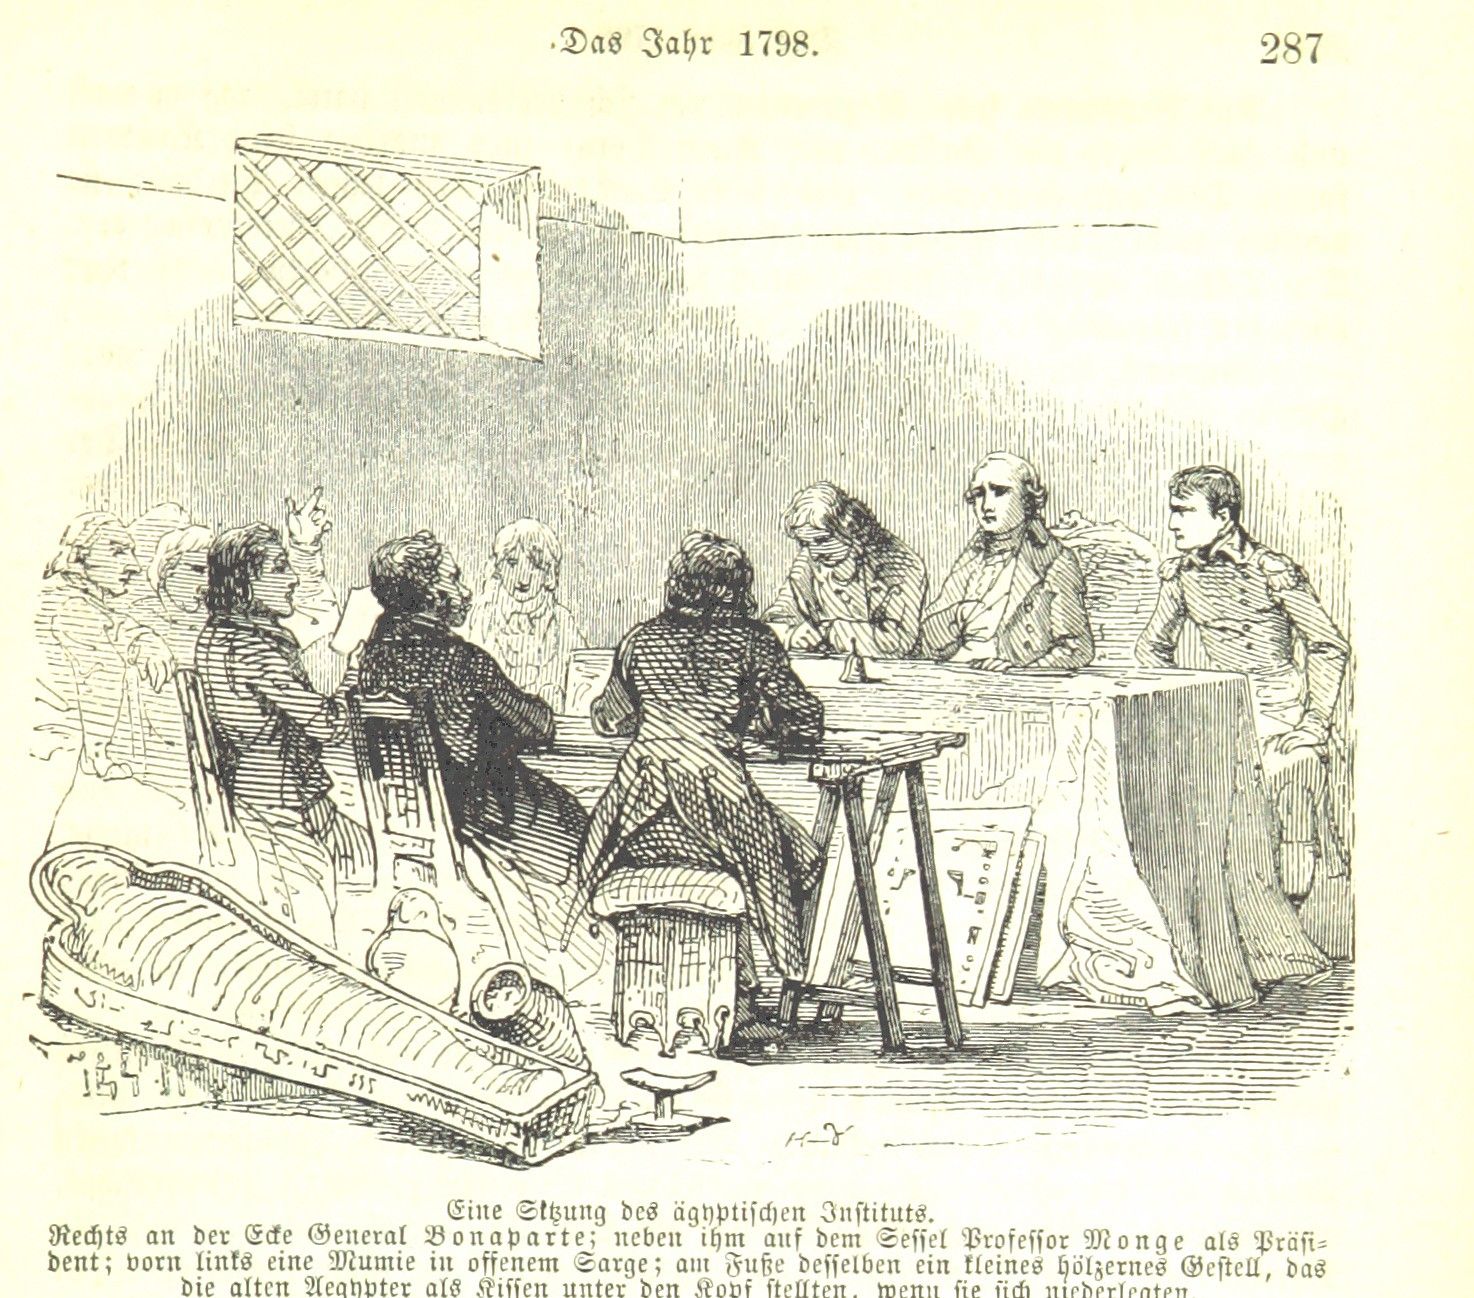 A black and white illustration of a group of uniformed men seated at a long table. In the foreground, a mummy in its sarcophagus and some other assorted urns and such. The caption is in German.